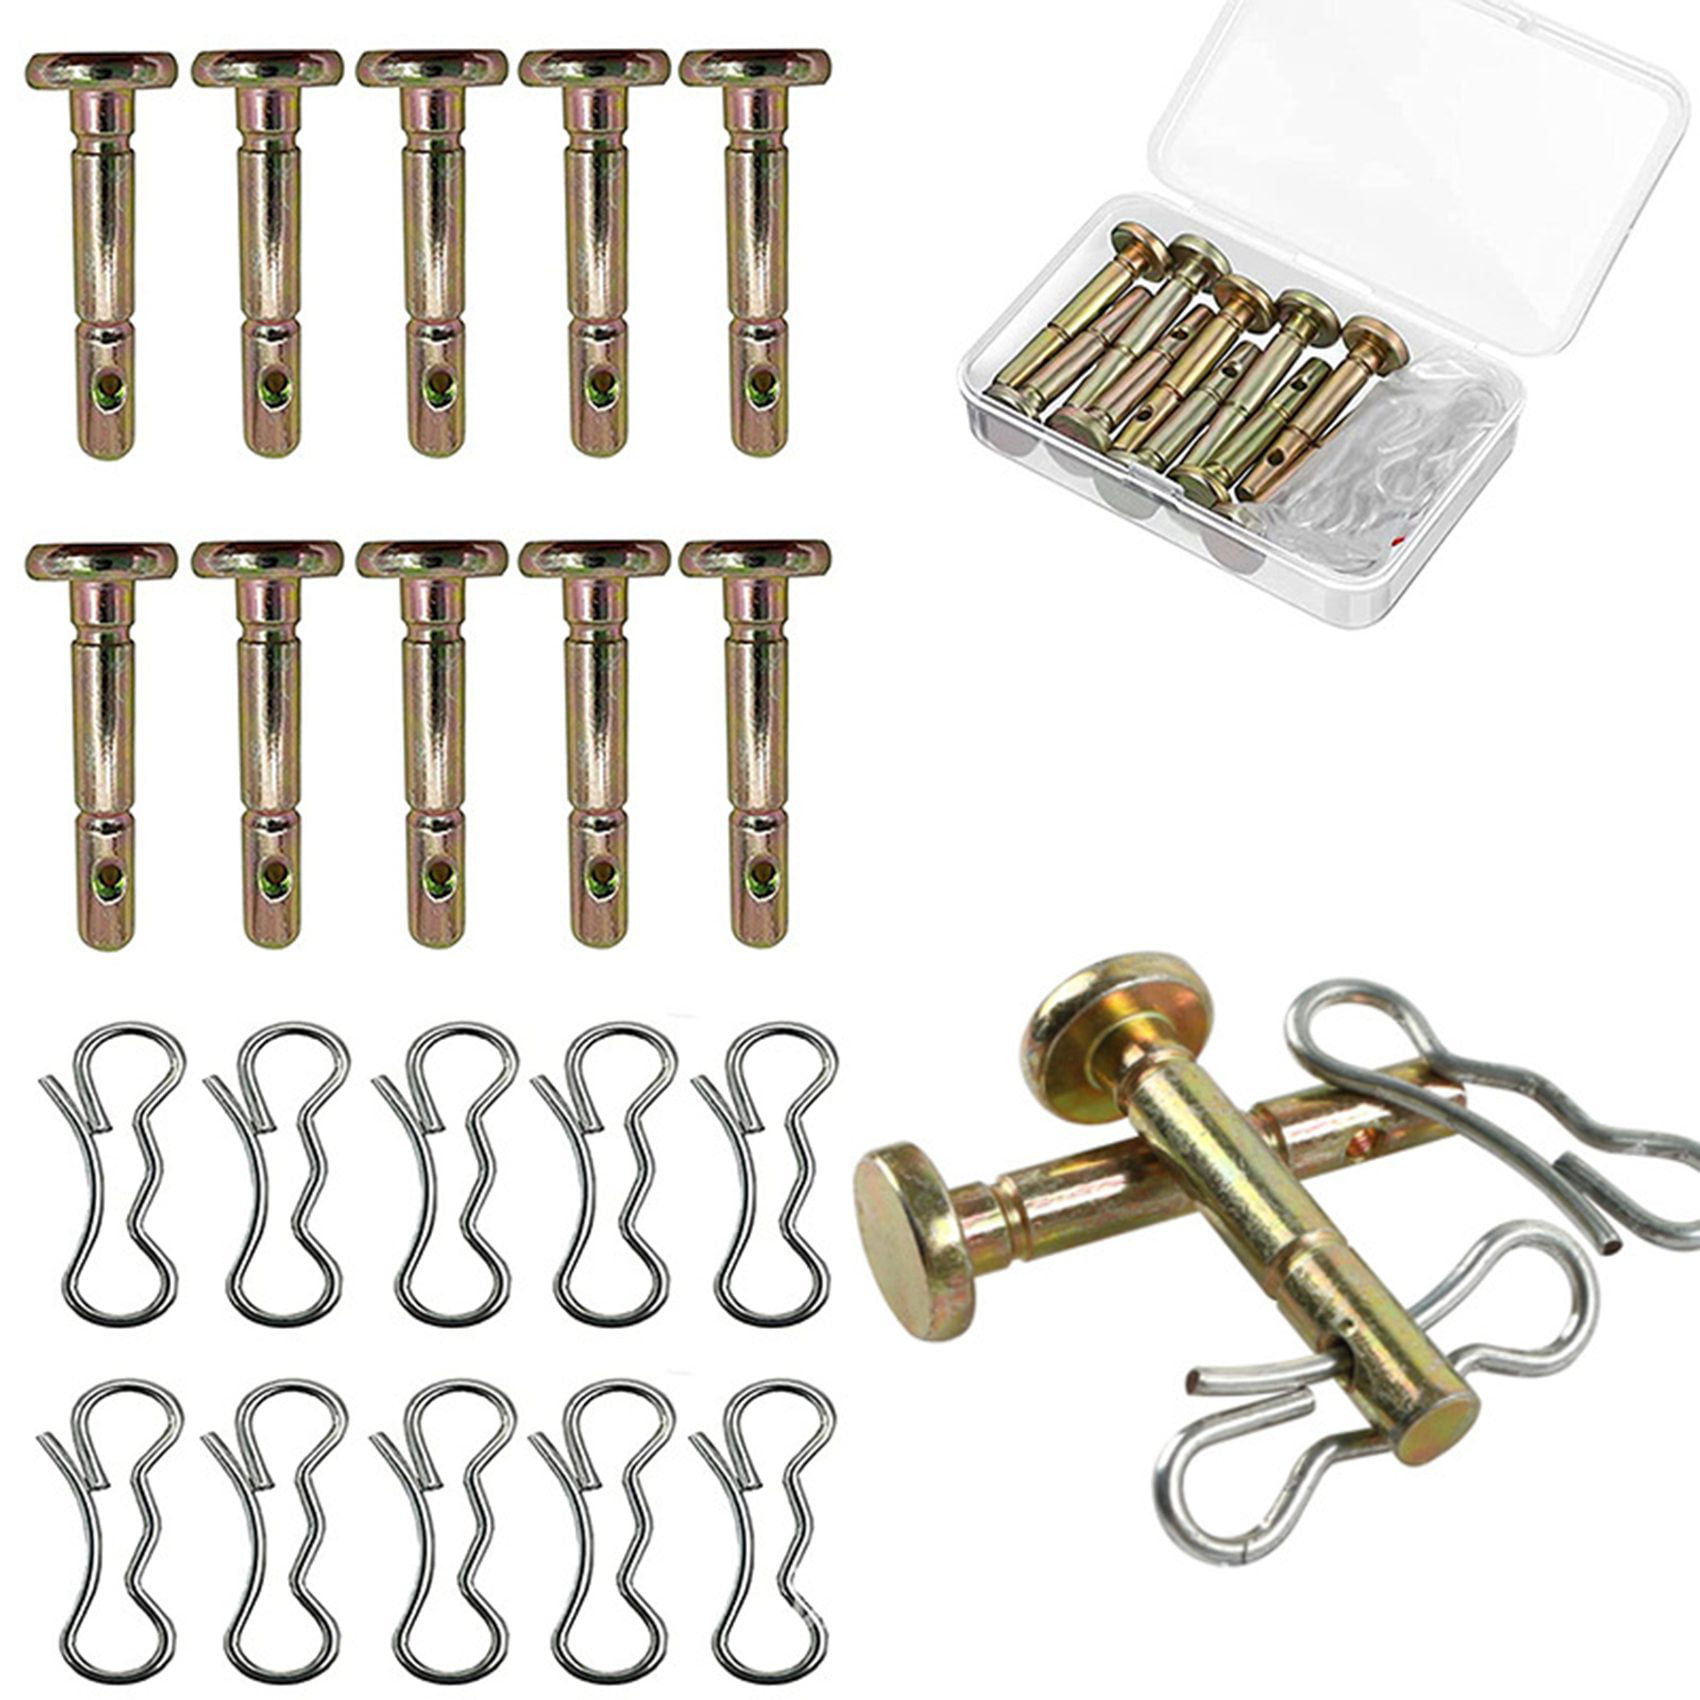 Simplicity 15257 for Snow Blowers/Throwers & Tractors / 1686806YP Snapper Briggs Shear Pin Kit 4 Pack 